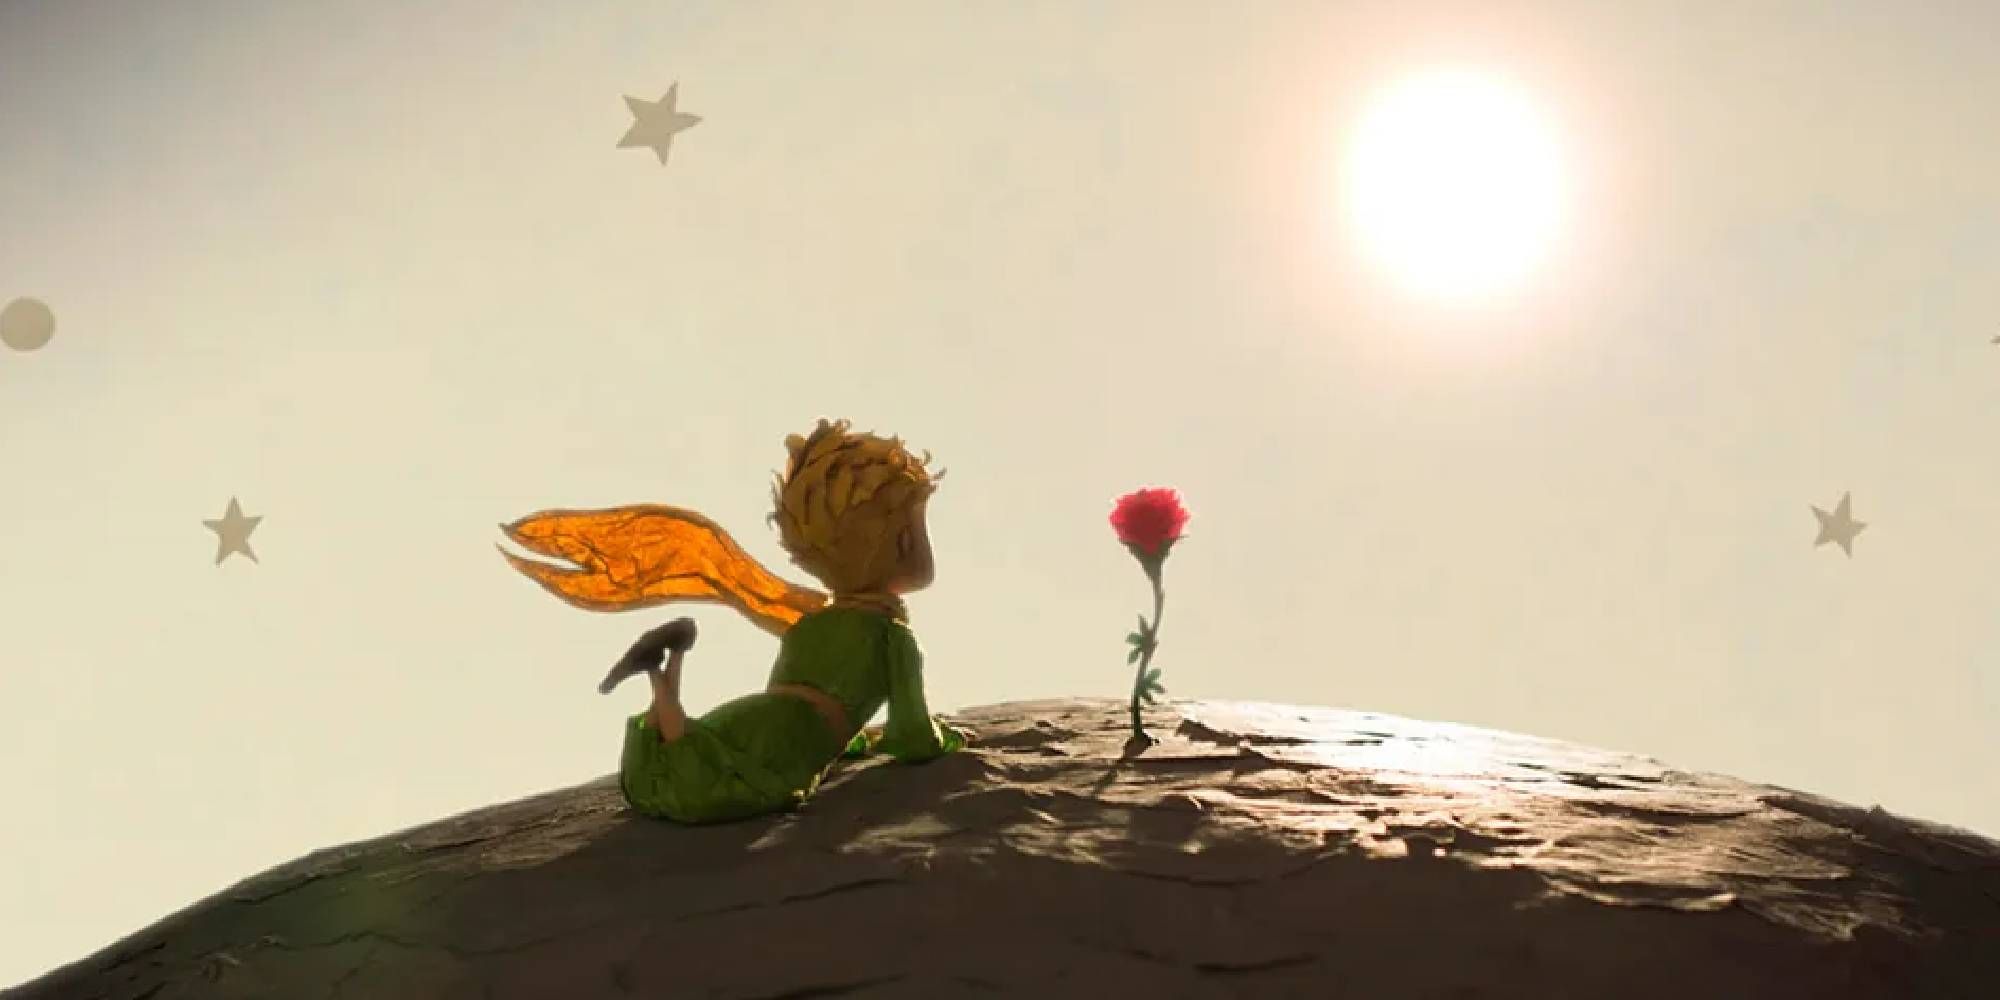 The Little Prince and the Rose side by side in The Little Prince.